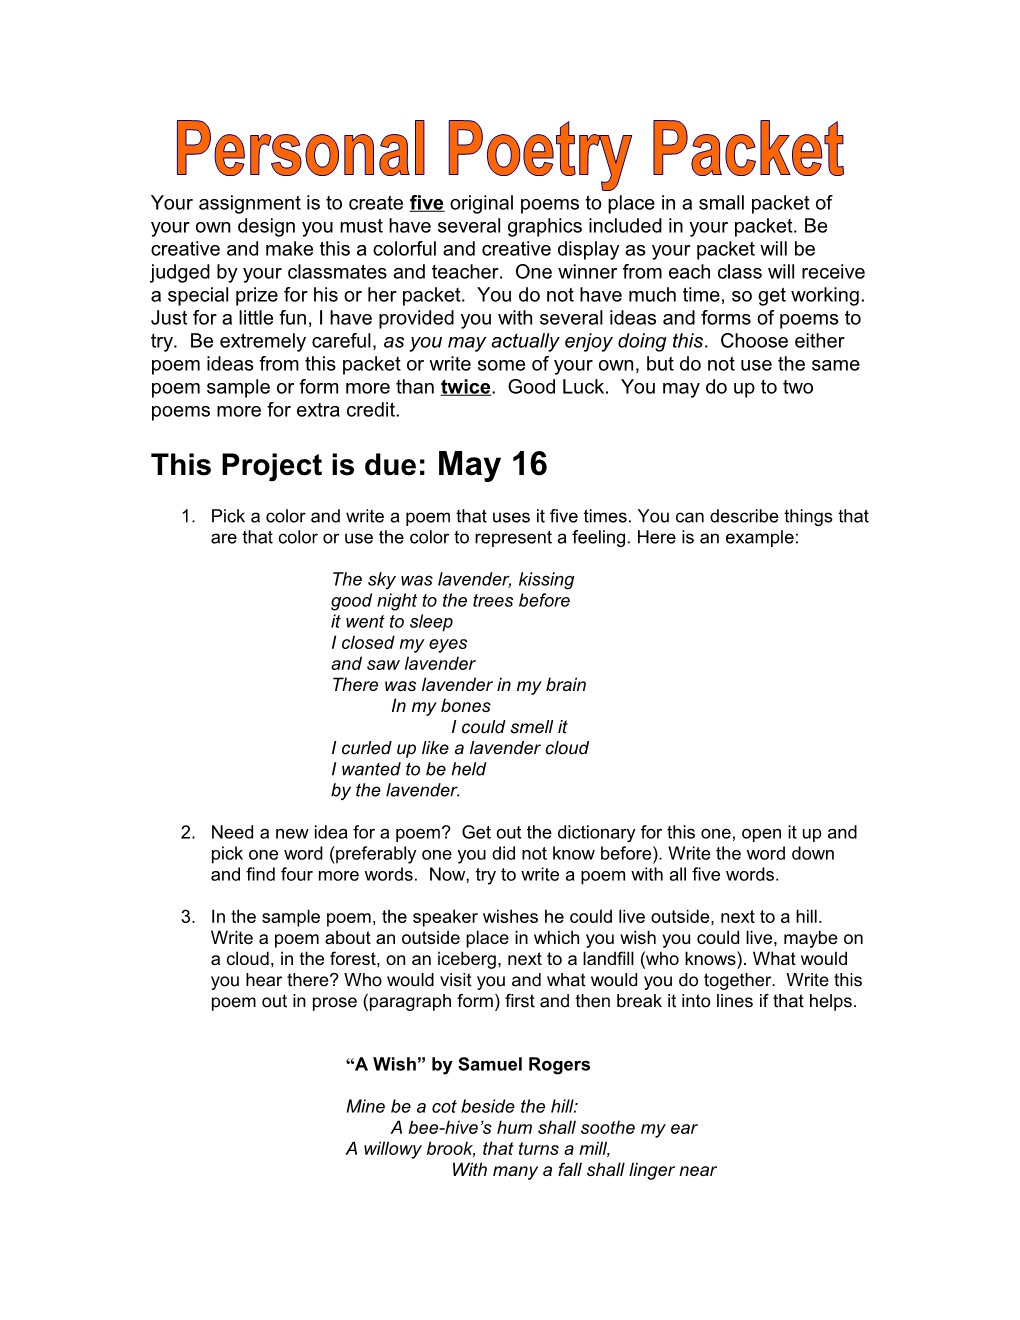 Personal Poetry Packet